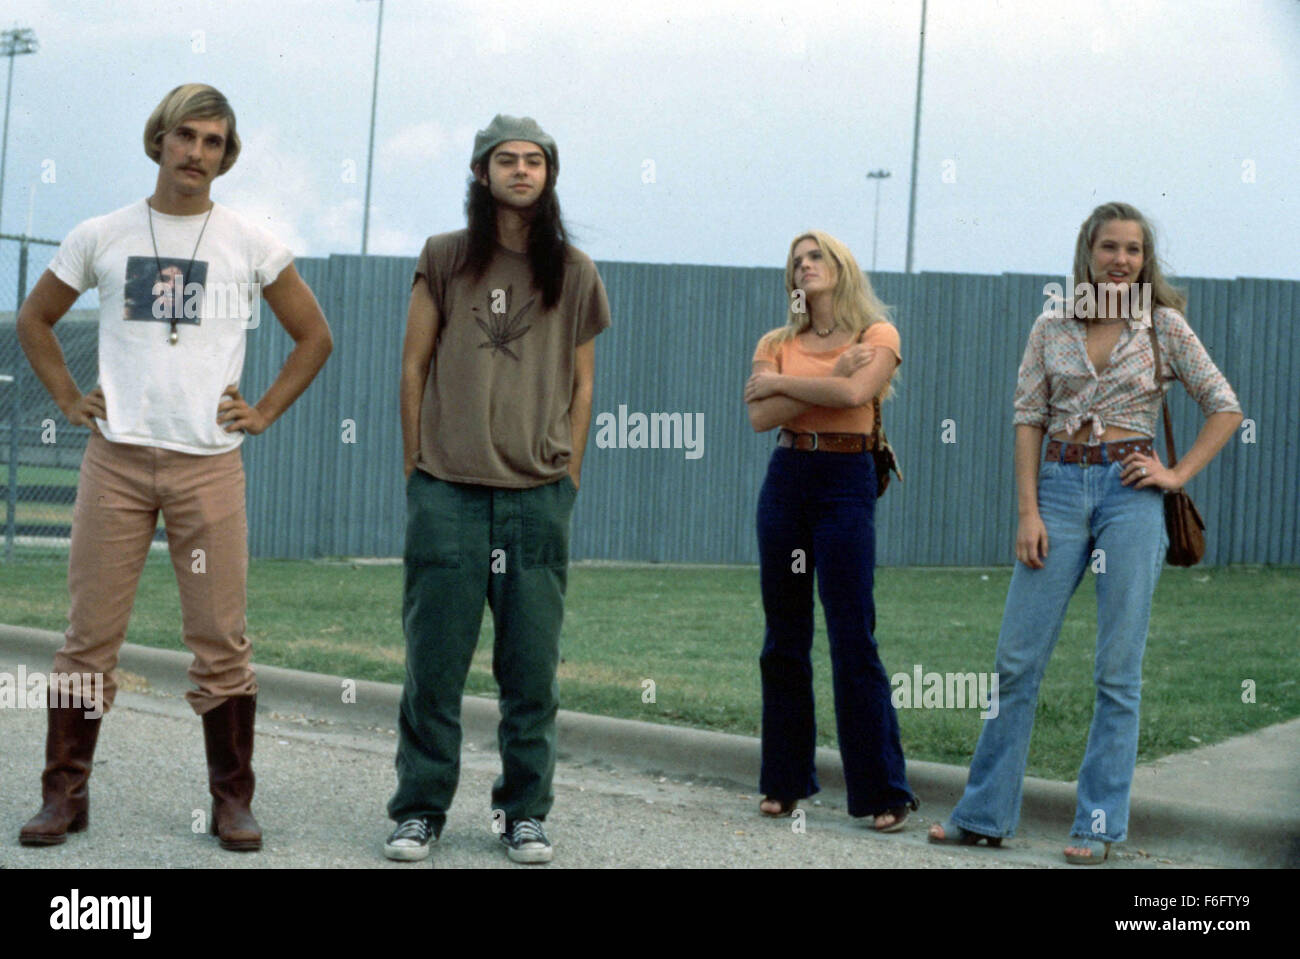 Sep 10, 1993; Austin, TX, USA; MATTHEW MCCONAUGHEY, RORY COCHRANE, DEENA MARTIN and JOEY LAUREN ADAMS star as David Wooderson, Ron Slater, Shavonne Wright and Simone Kerr in the comedy drama 'Dazed and Confused' directed by Richard Linklater. Stock Photo